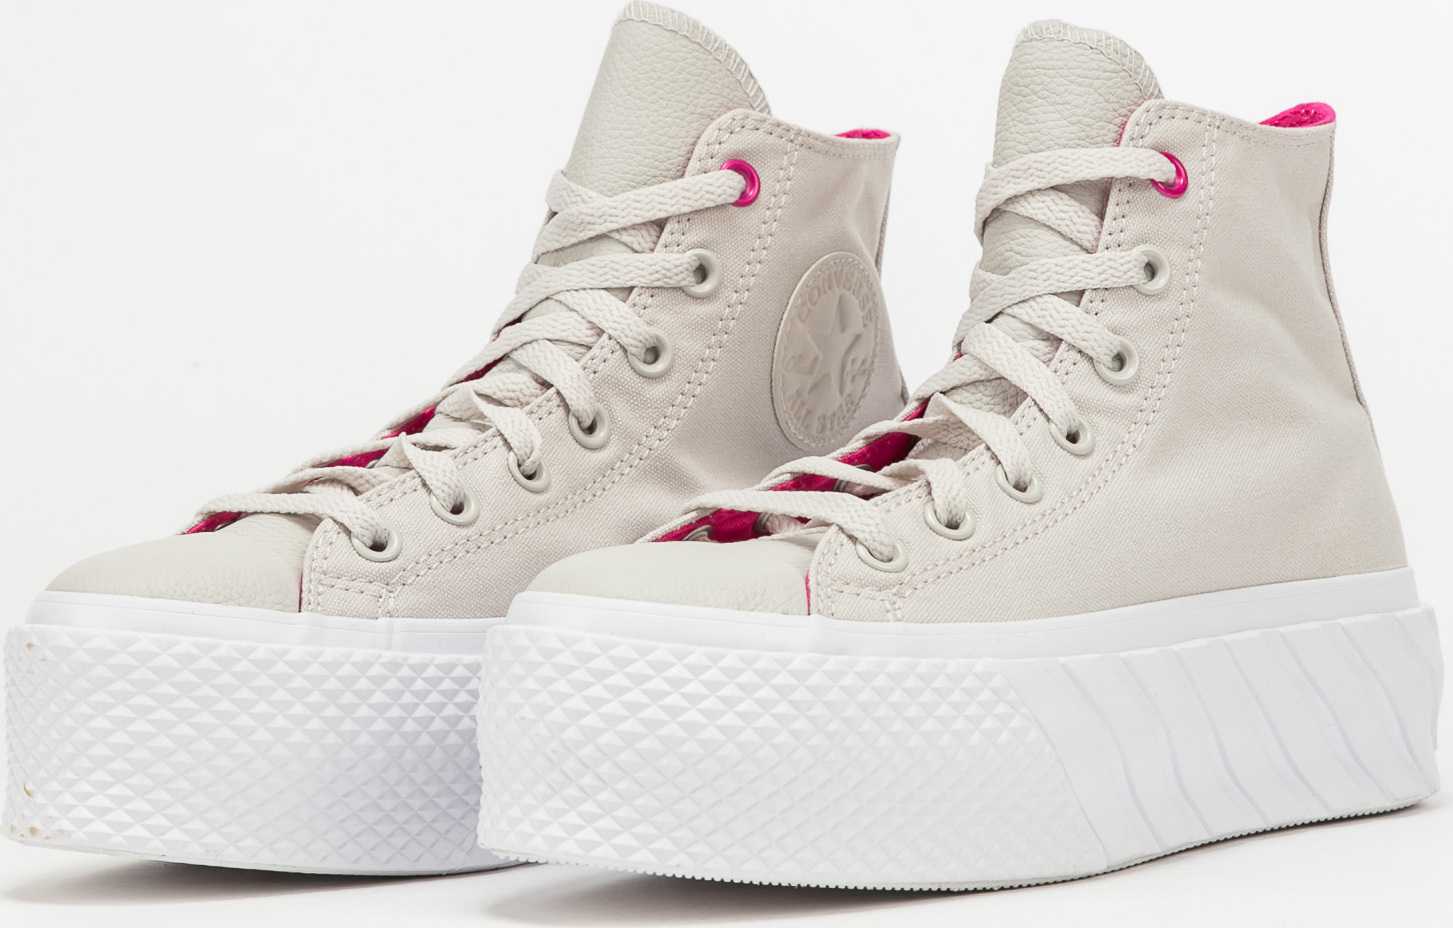 Converse Chuck Taylor All Star Lift 2X Hi pale putty / prime pink / white Converse